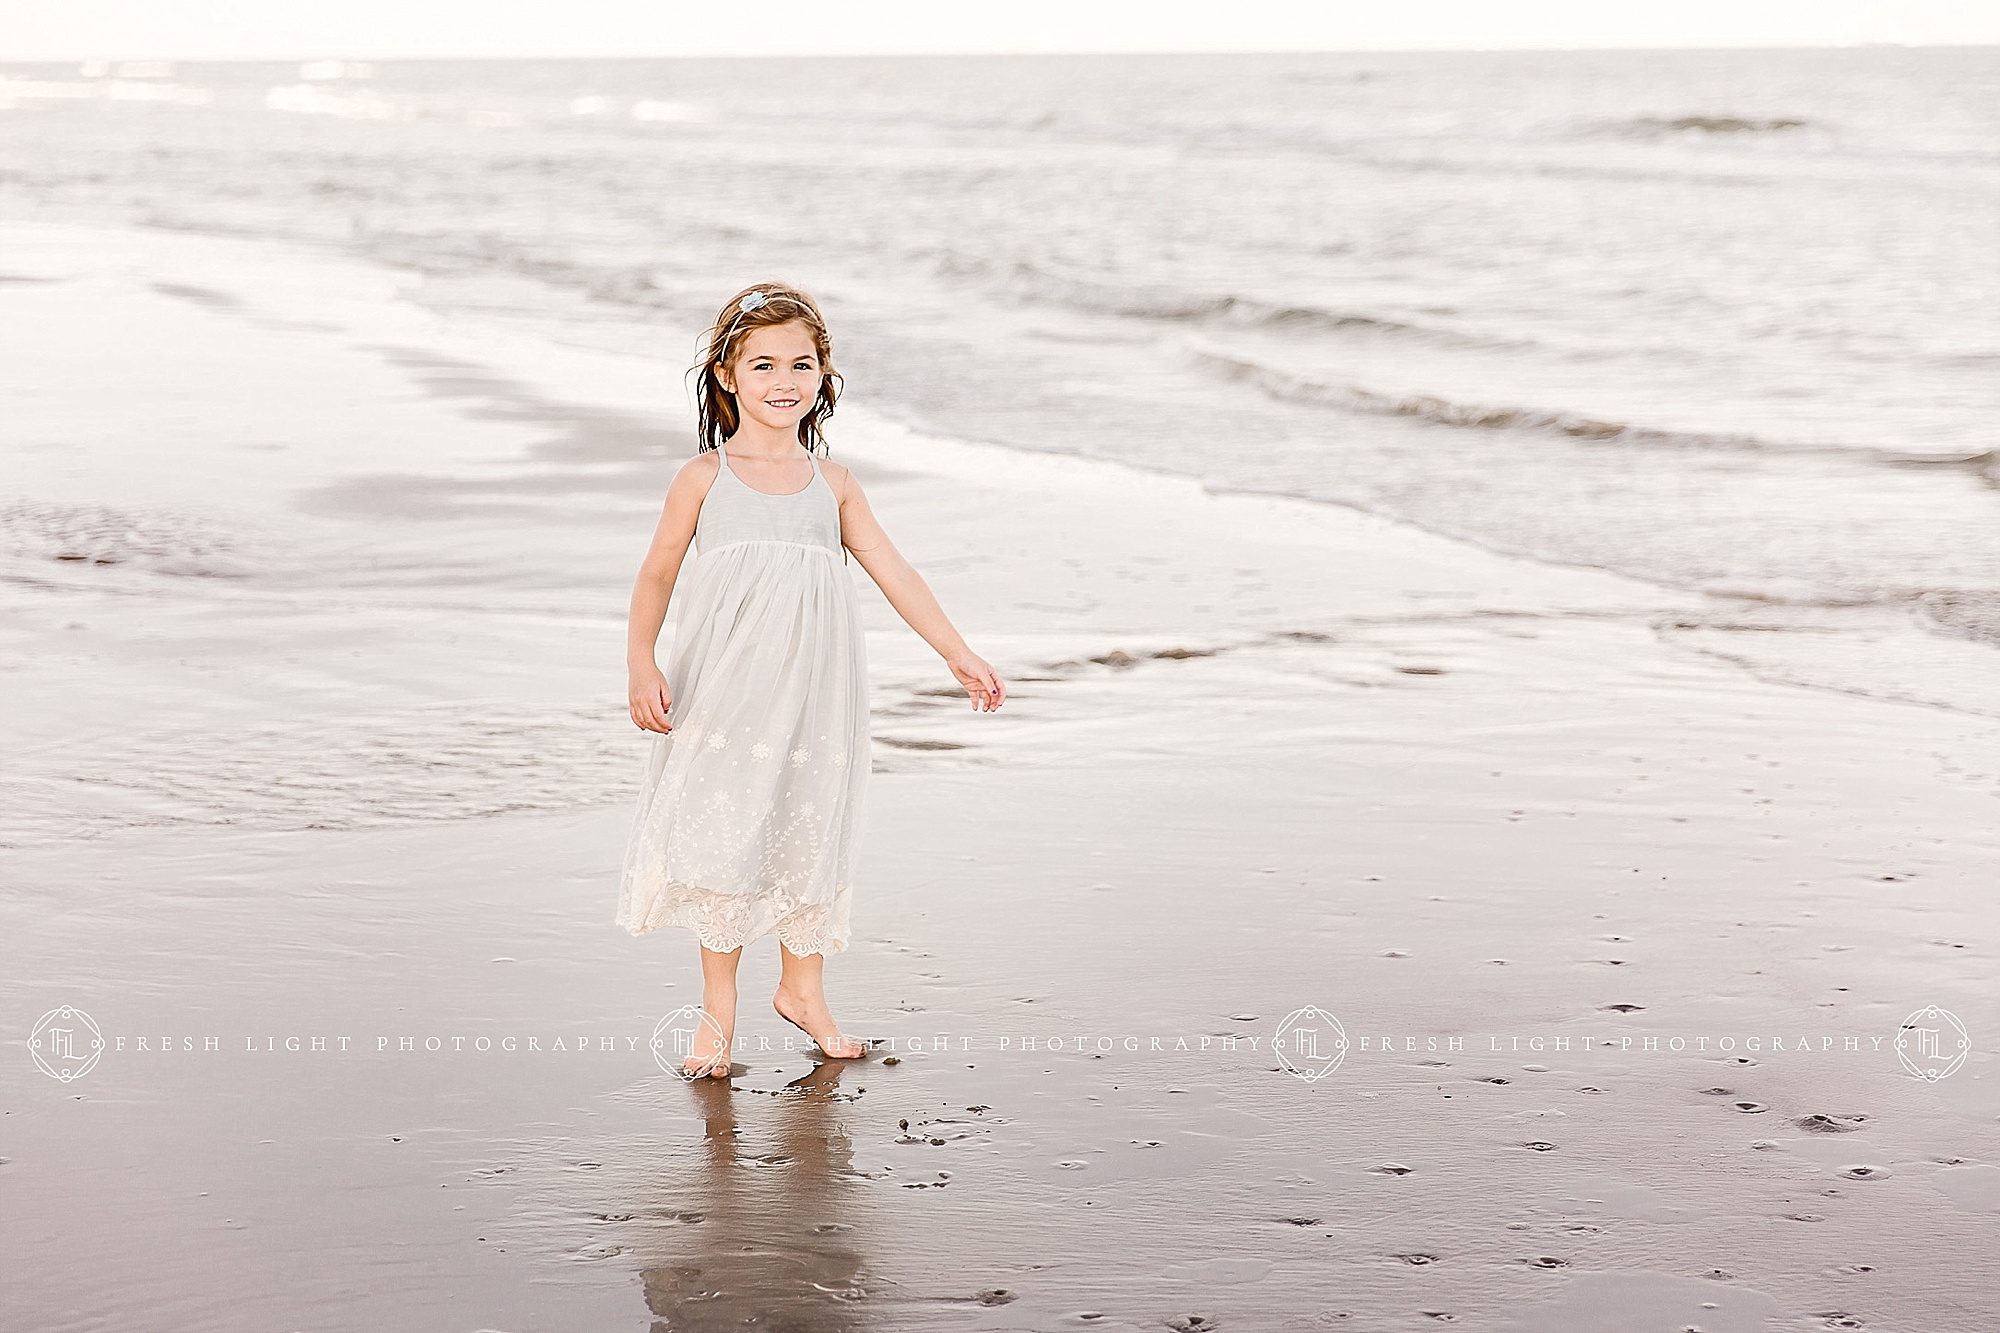 Daughter standing on the beach